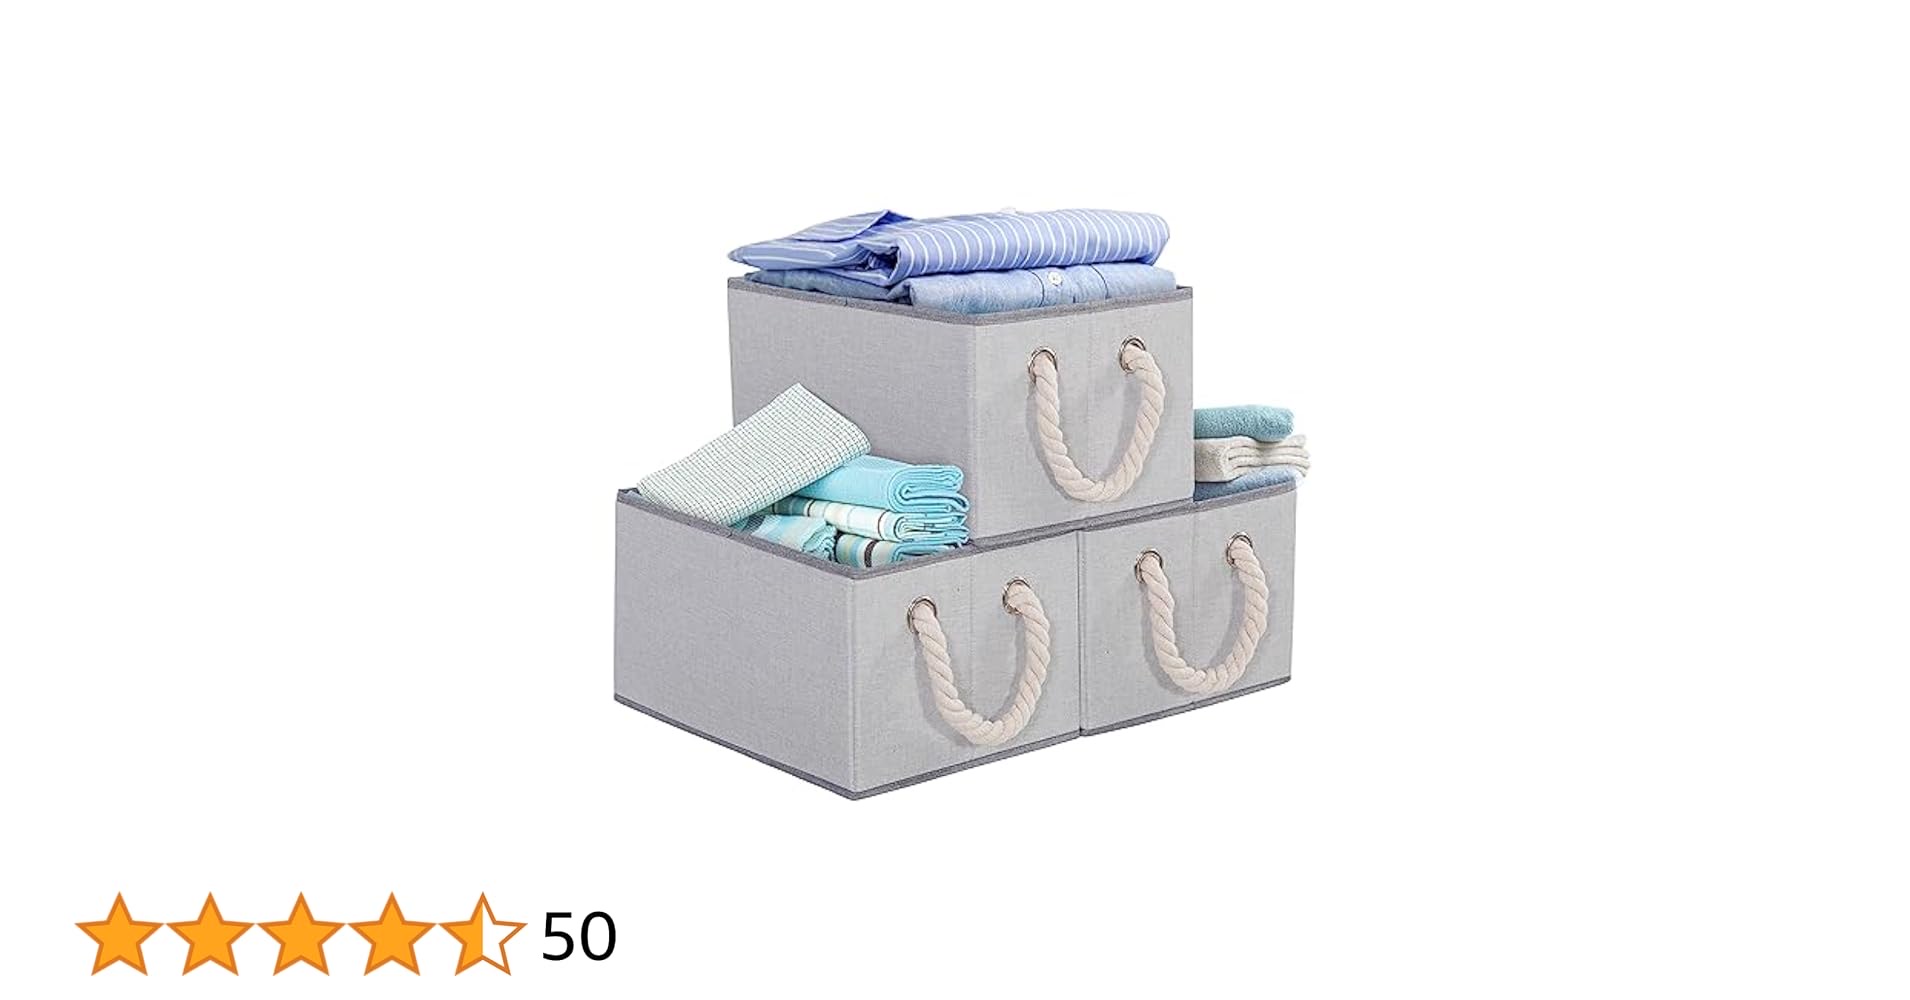 STORAGEIDEAS Collapsible Storage Bins Cubes With Handles, Decorative Storage Baskets For Shelves Organizing, Sturdy Organizers Storage Boxes For Closet, Cloth, Toys, Books, Pantry, 3 Pack, Gray, Large